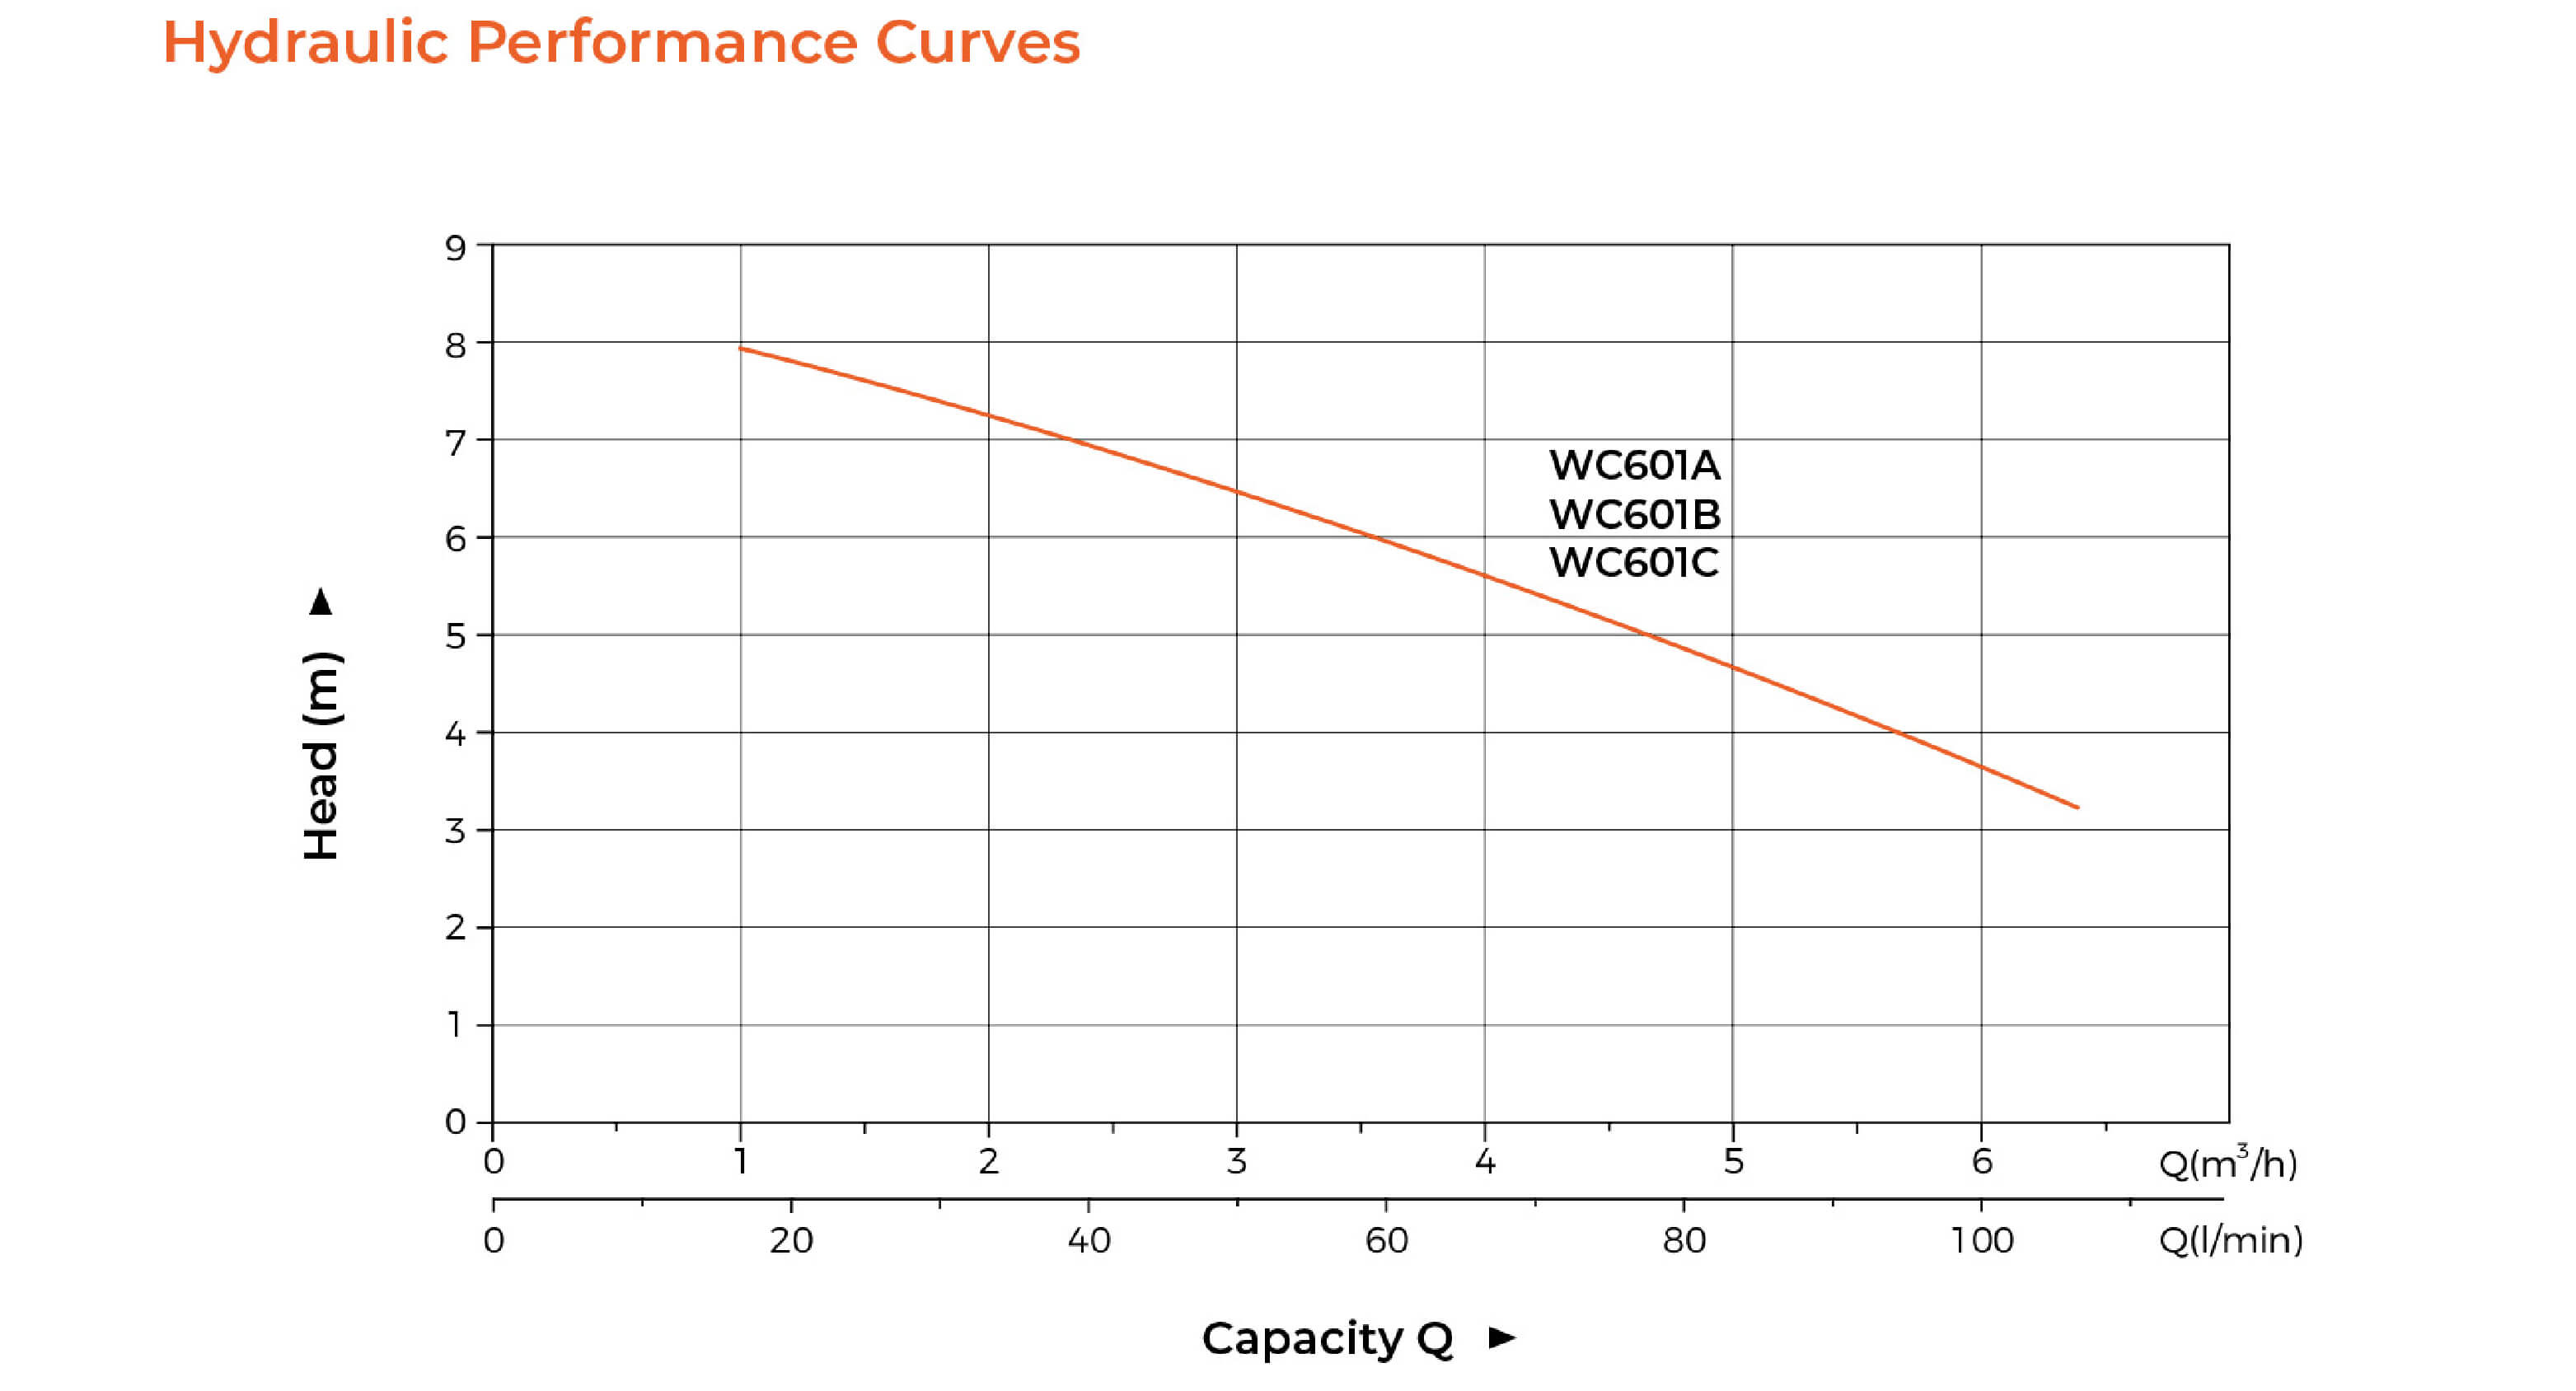 WC-1 Domestic Lifting Station Hydraulic Performance Curves